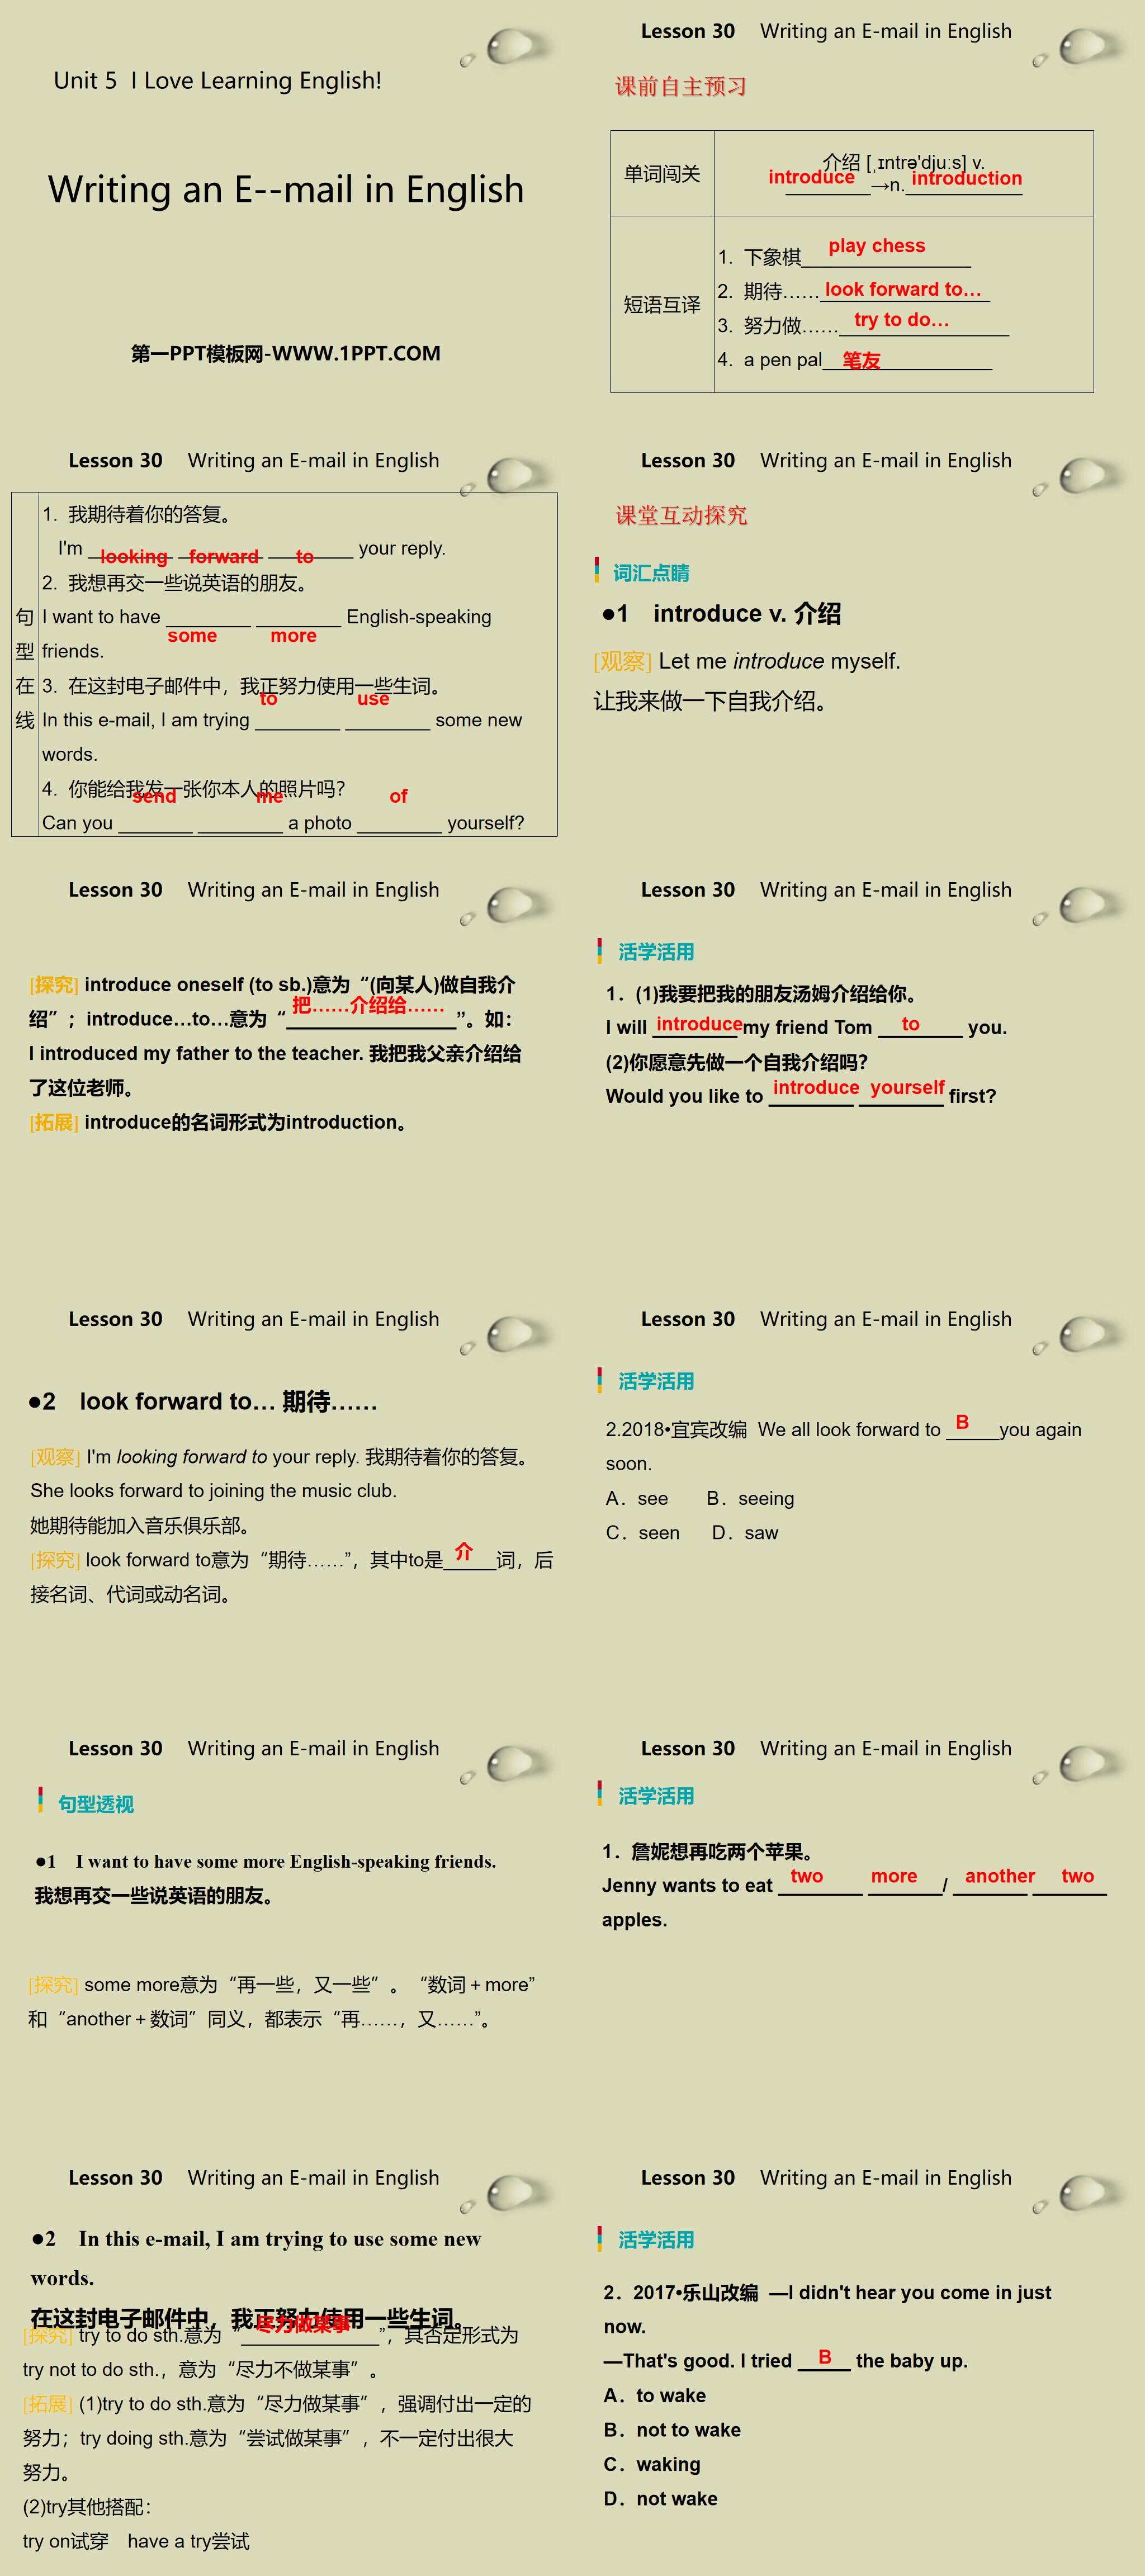 《Writing an E-mail in English》I Love Learning English PPT免费下载
（2）